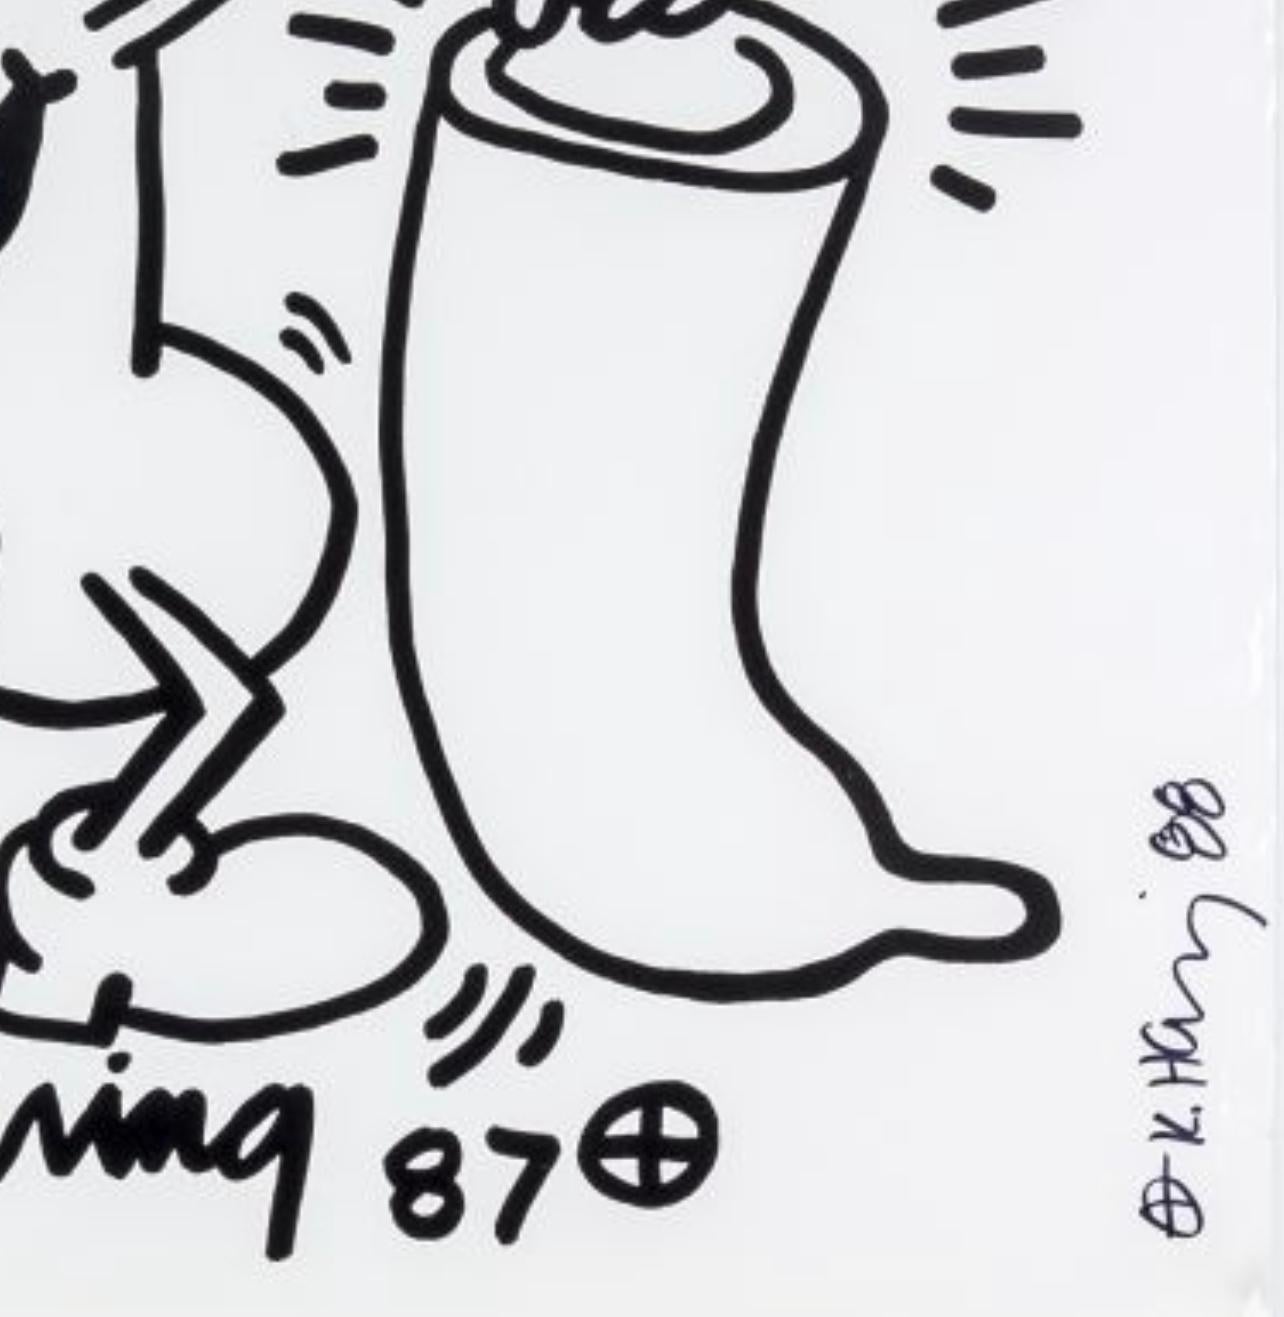 Artist: Keith Haring (1958-1990)
Title: Safe Sex! (Gundel 60)
Year: 1987-1988
Medium: Offset lithograph on paper mounted on rice paper
Size: 29.52 x 27.36 inches
Condition: Very good condition
Inscription: Hand signed and dated in felt-marker, right